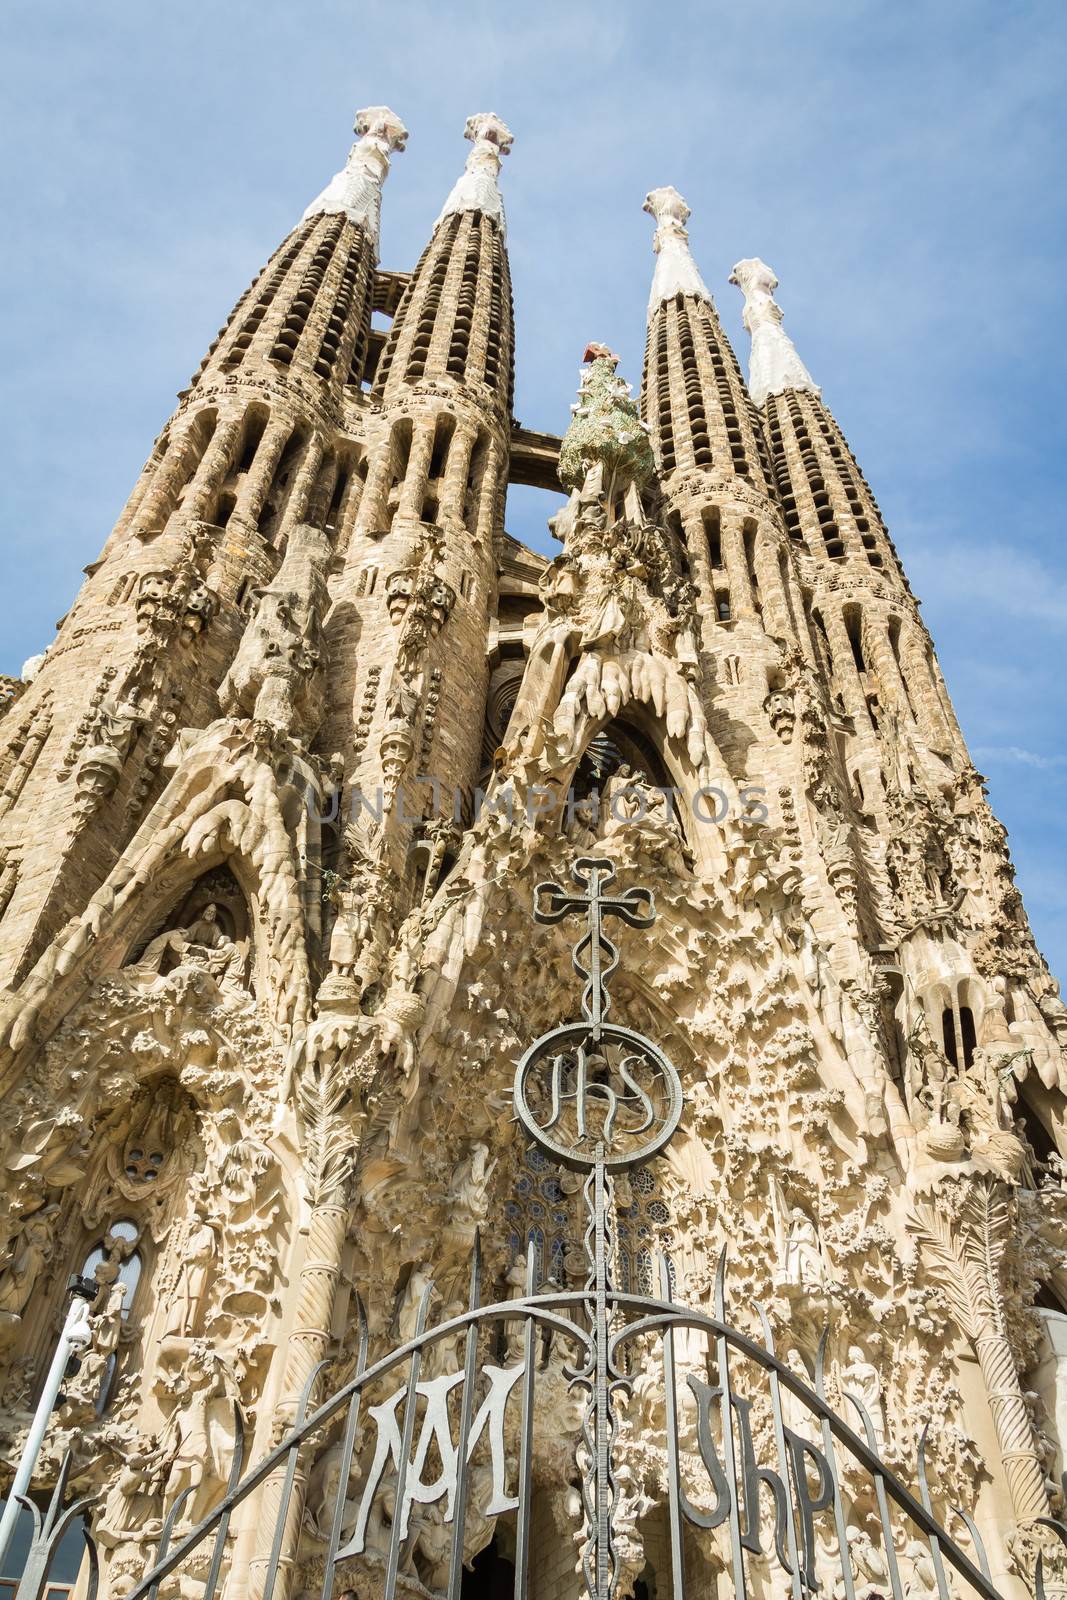 The Sagrada Familia cathedral in Barcelona, Spain by doble.d